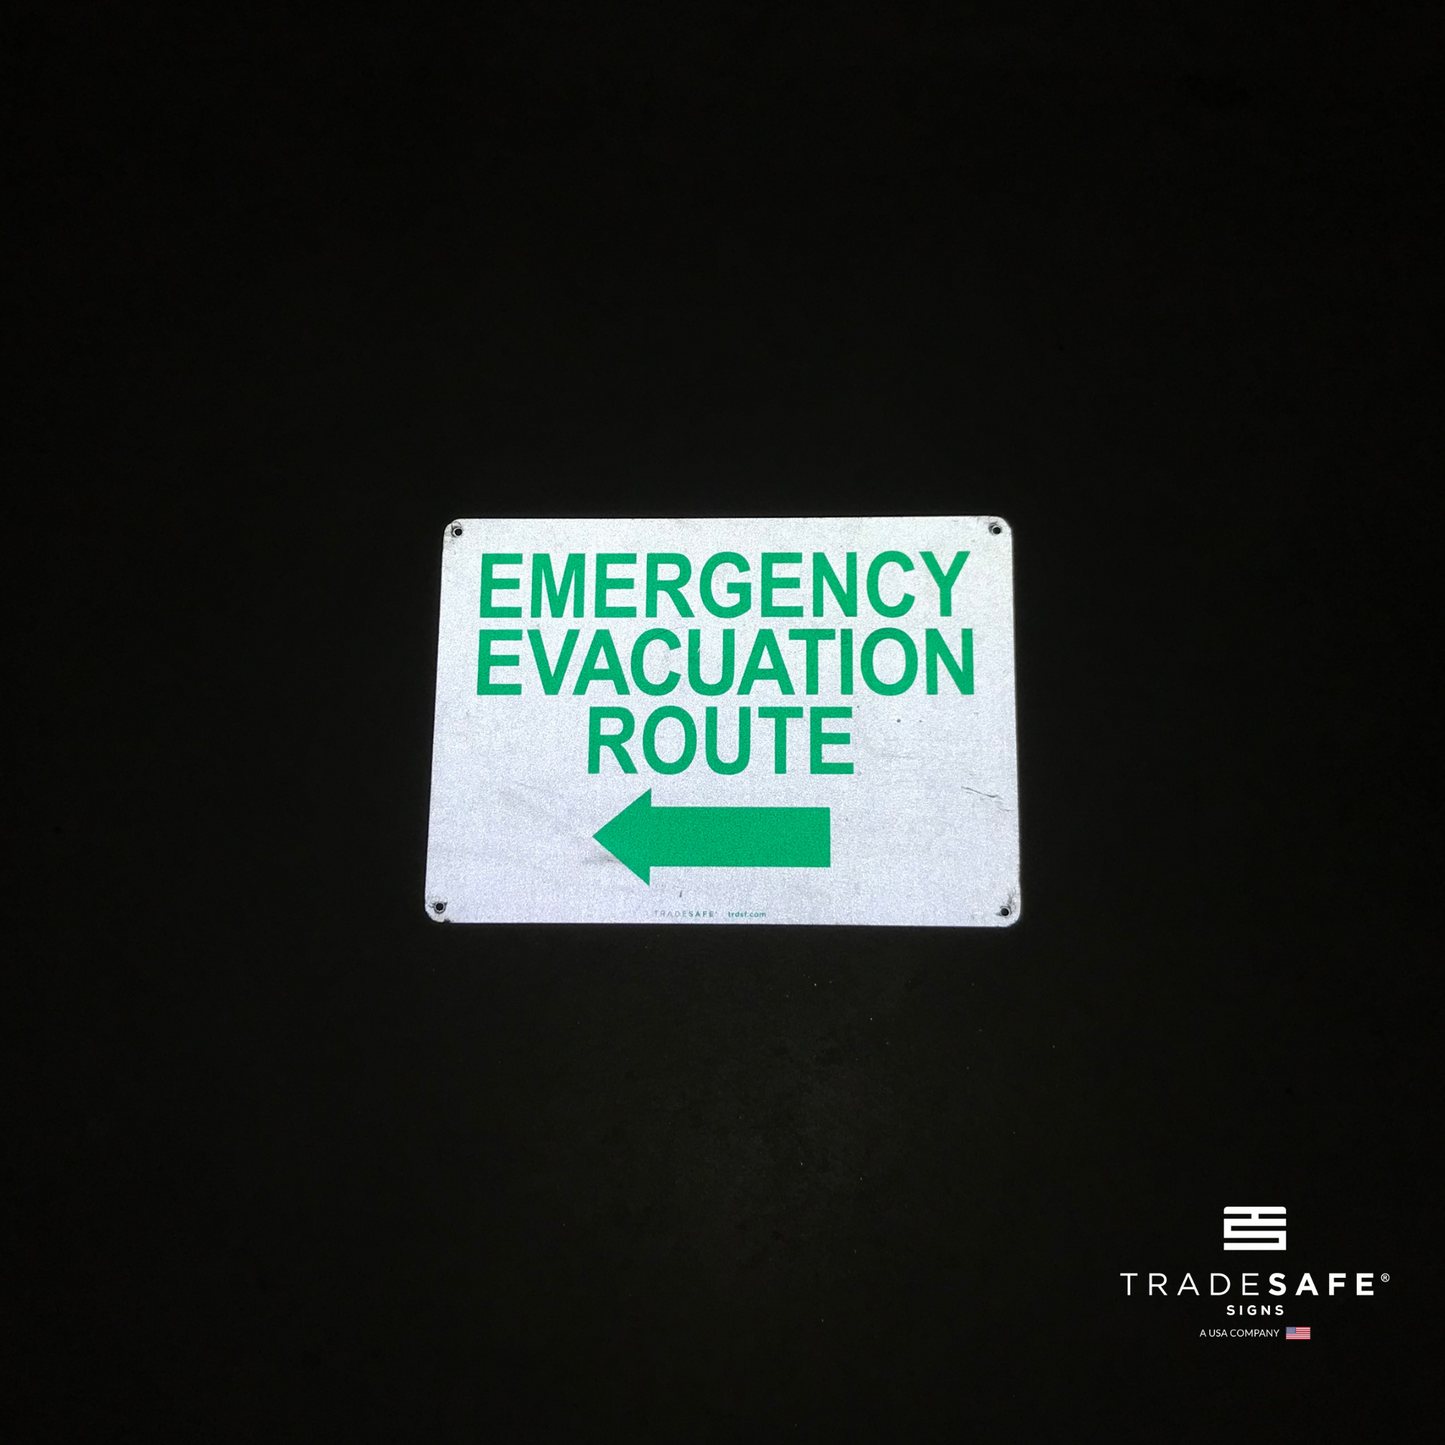 reflective attribute of evacuation sign on black background